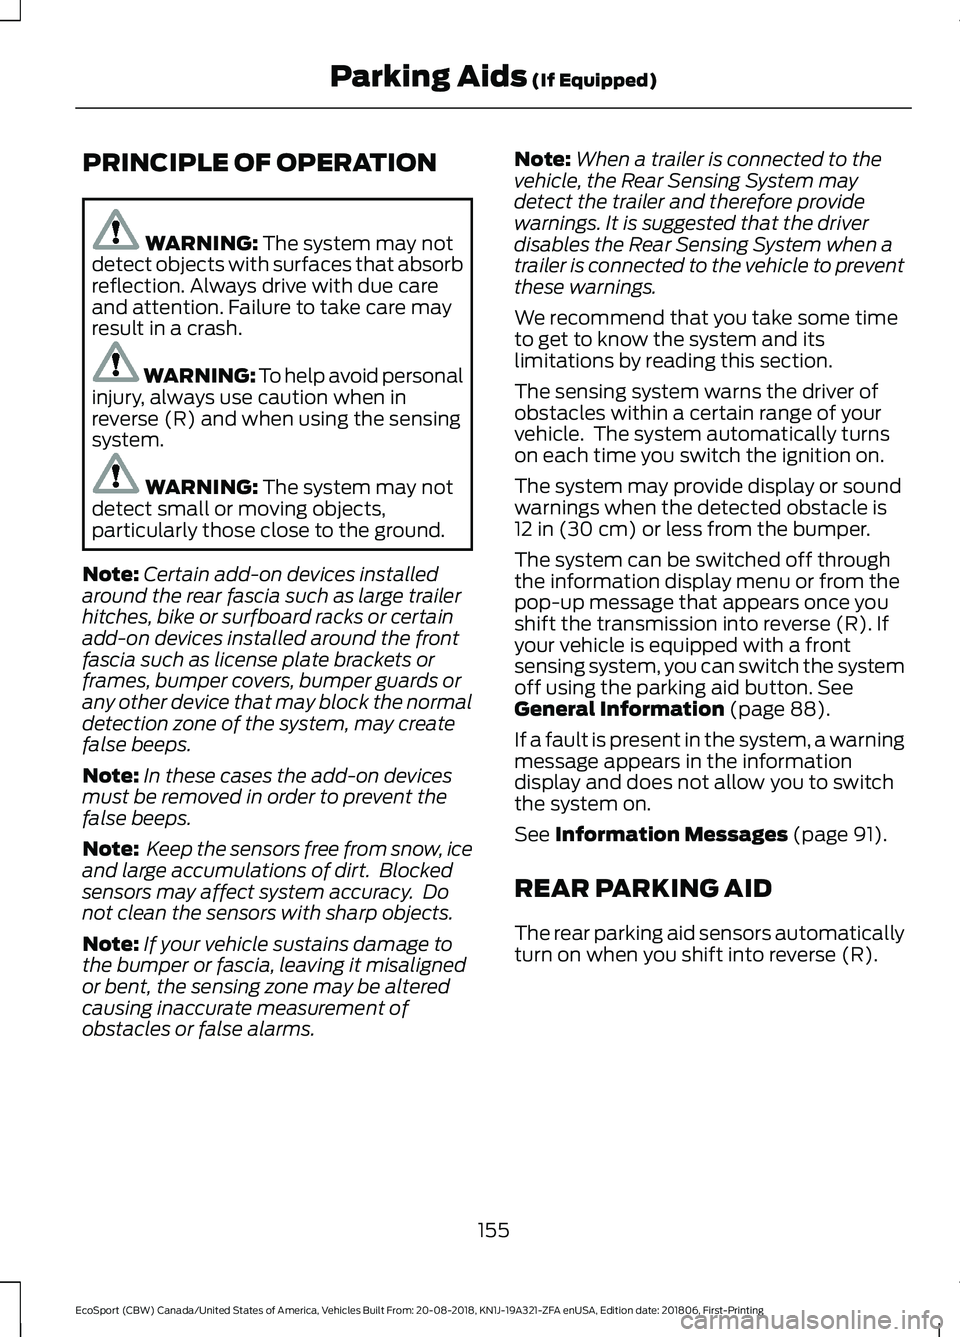 FORD ECOSPORT 2019  Owners Manual PRINCIPLE OF OPERATION
WARNING: The system may notdetect objects with surfaces that absorbreflection. Always drive with due careand attention. Failure to take care mayresult in a crash.
WARNING: To he